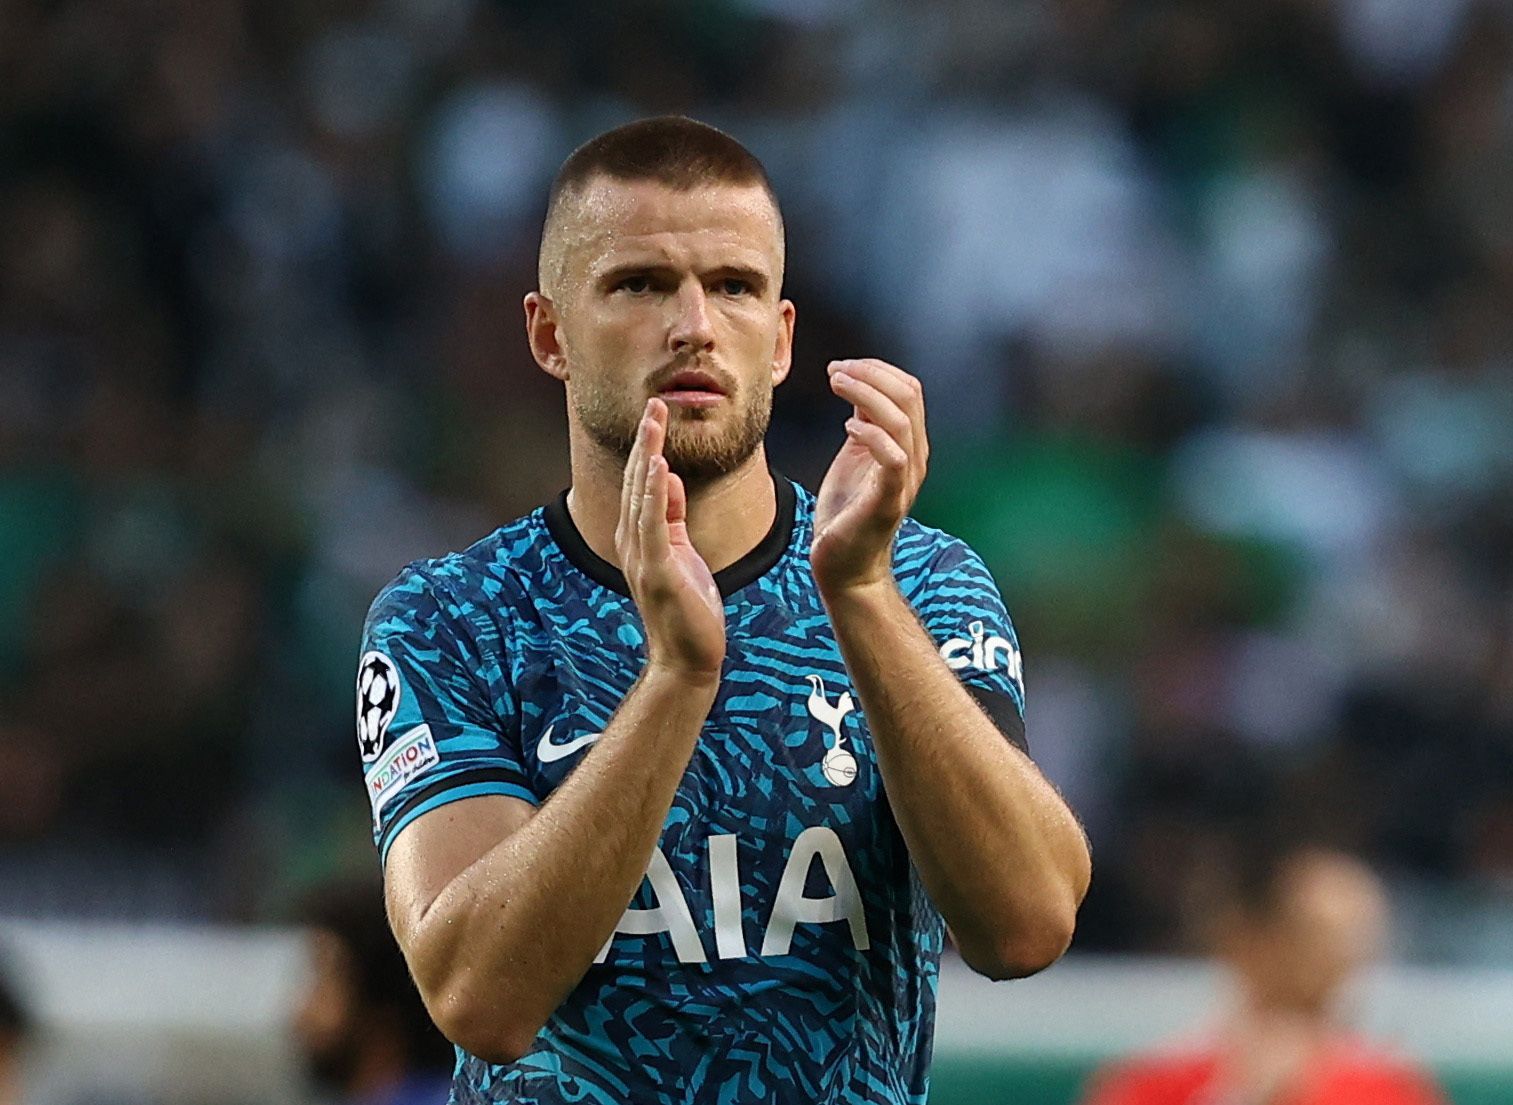 Tottenham: Tony Cascarino questions Conte after message from Eric Dier -Tottenham Hotspur News